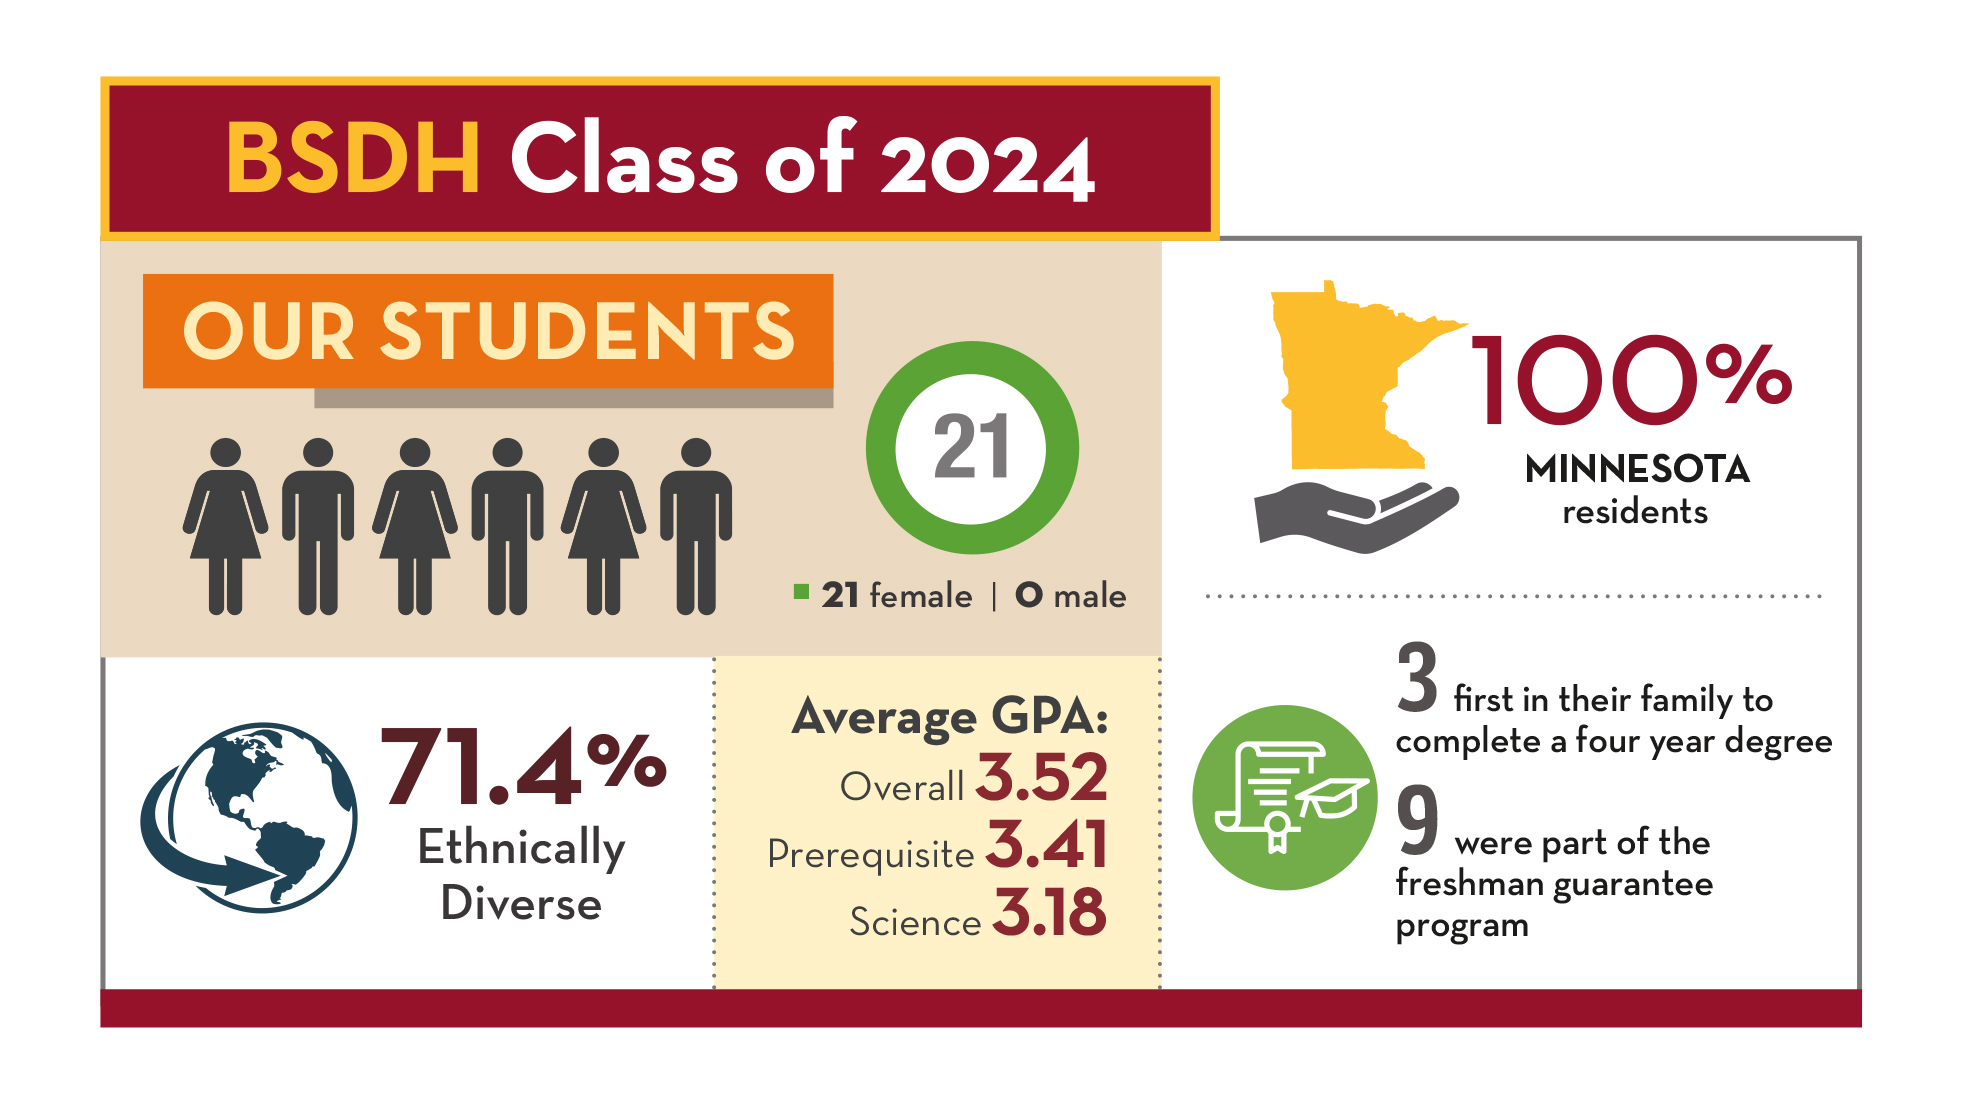 Dental Hygiene Class of 2024 - 21 students, 100% minnesota residents, 71.4% ethnically diverse, 3.52 average GPA, 3 are first in their family to complete a four-year degree, 9 were part of the freshman guarantee program